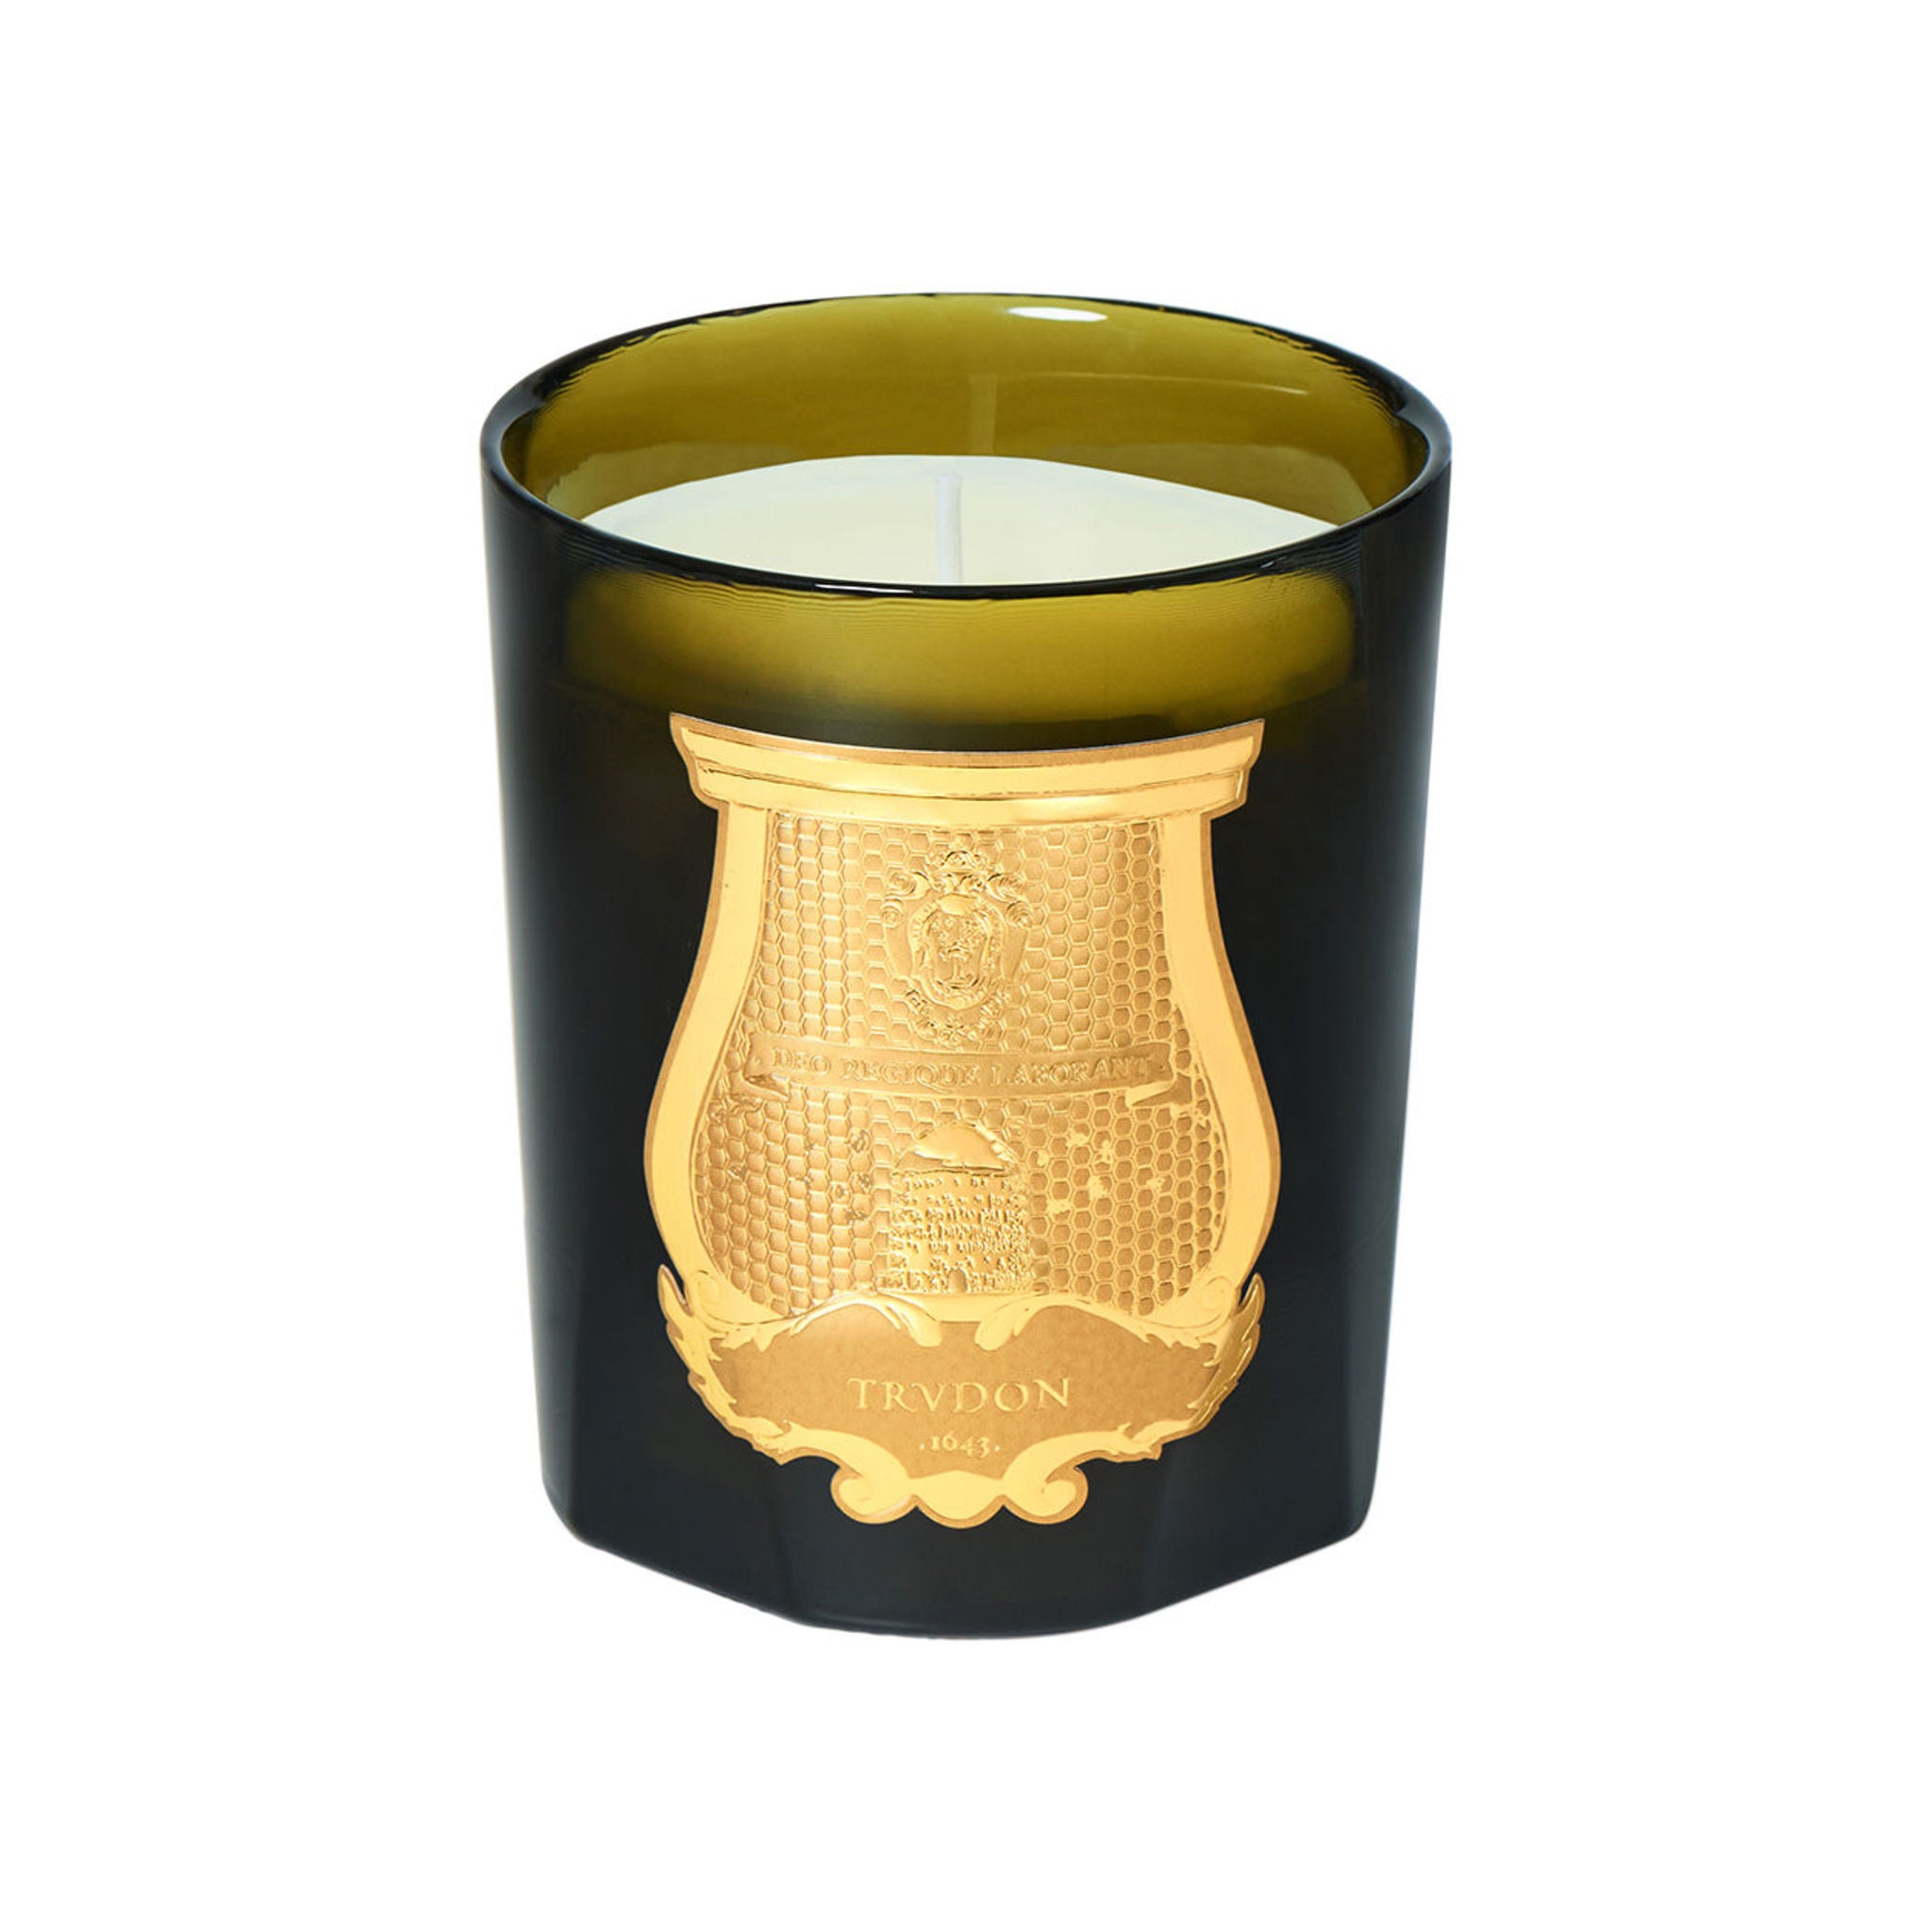 Trudon Cyrnos Candle Size variant: 9.5 oz (Classic) main image.